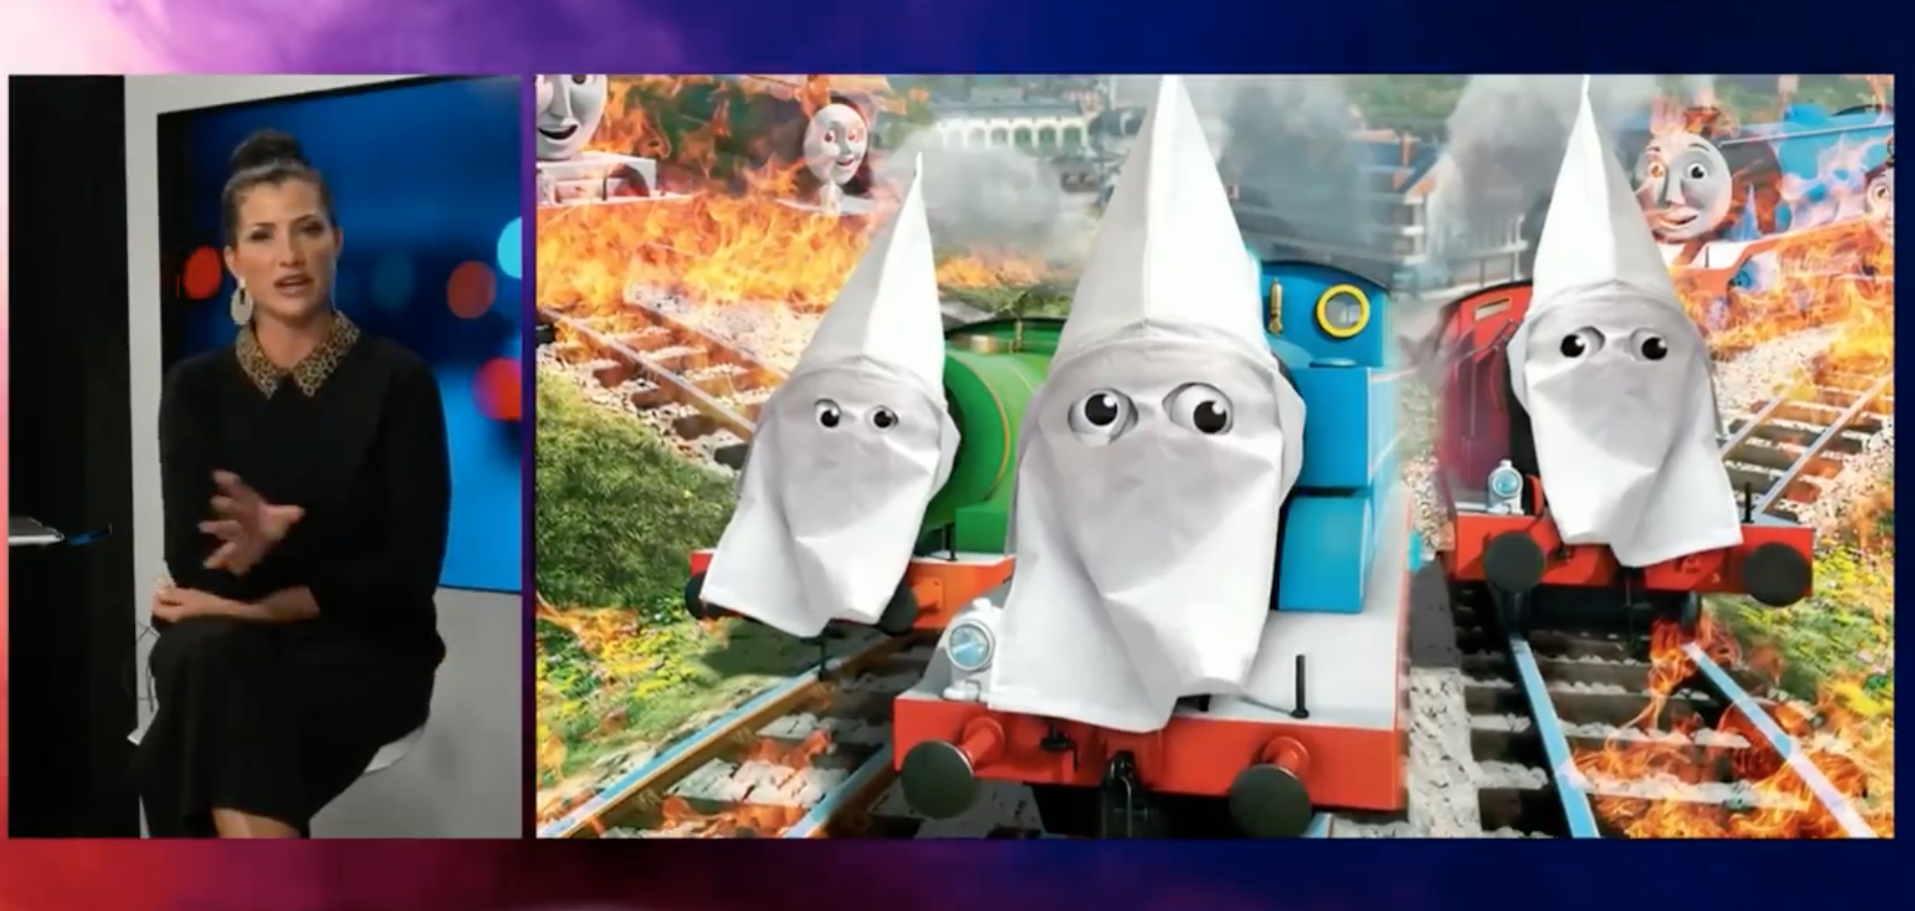 Nra Tv Dress Up Thomas The Tank Engine And Friends As Kkk The